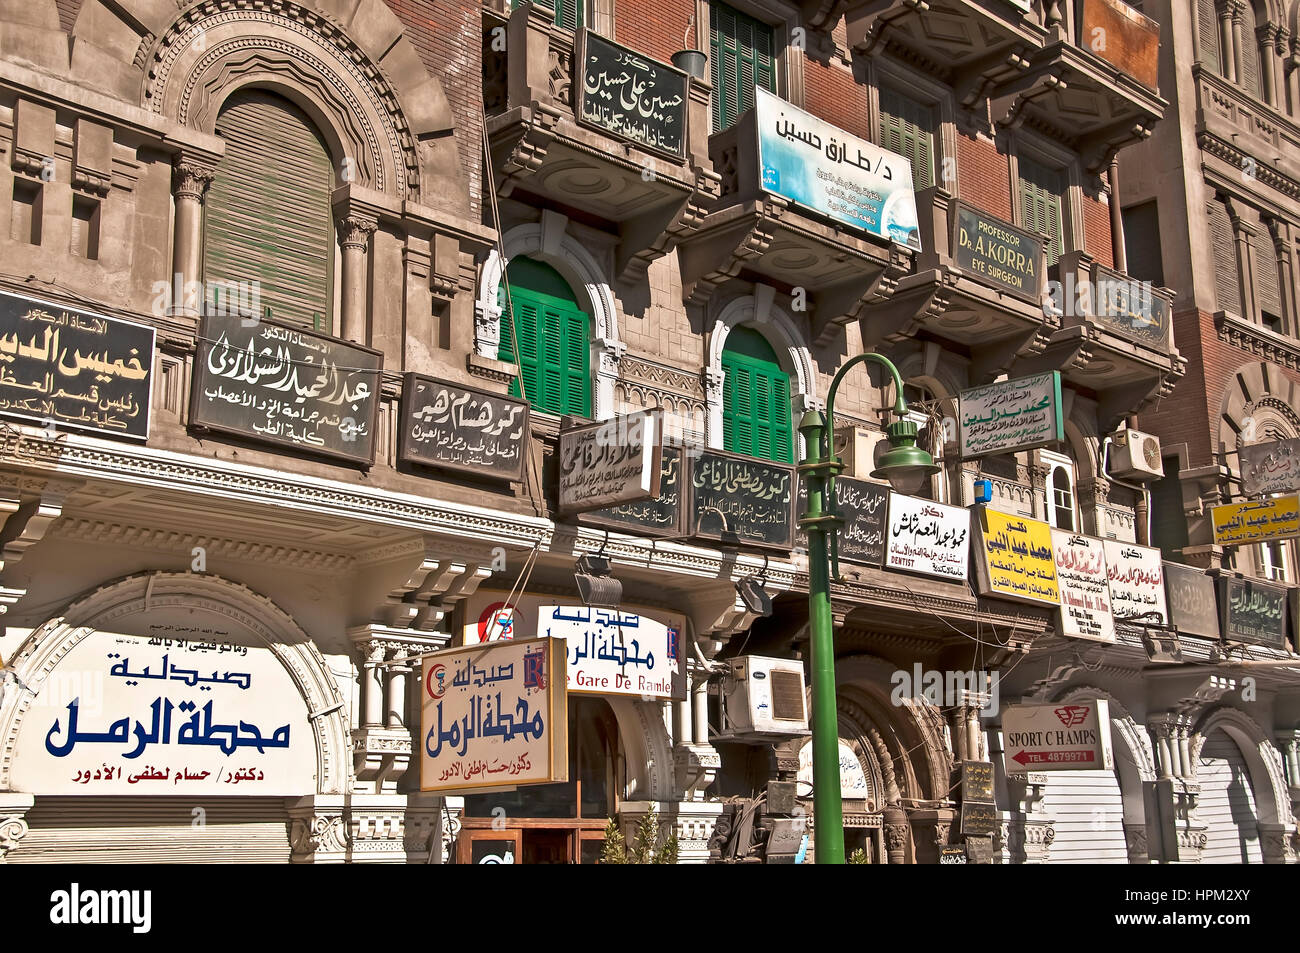 Downtown Alexandria street on the Corniche with numerous Arabic signs Stock Photo